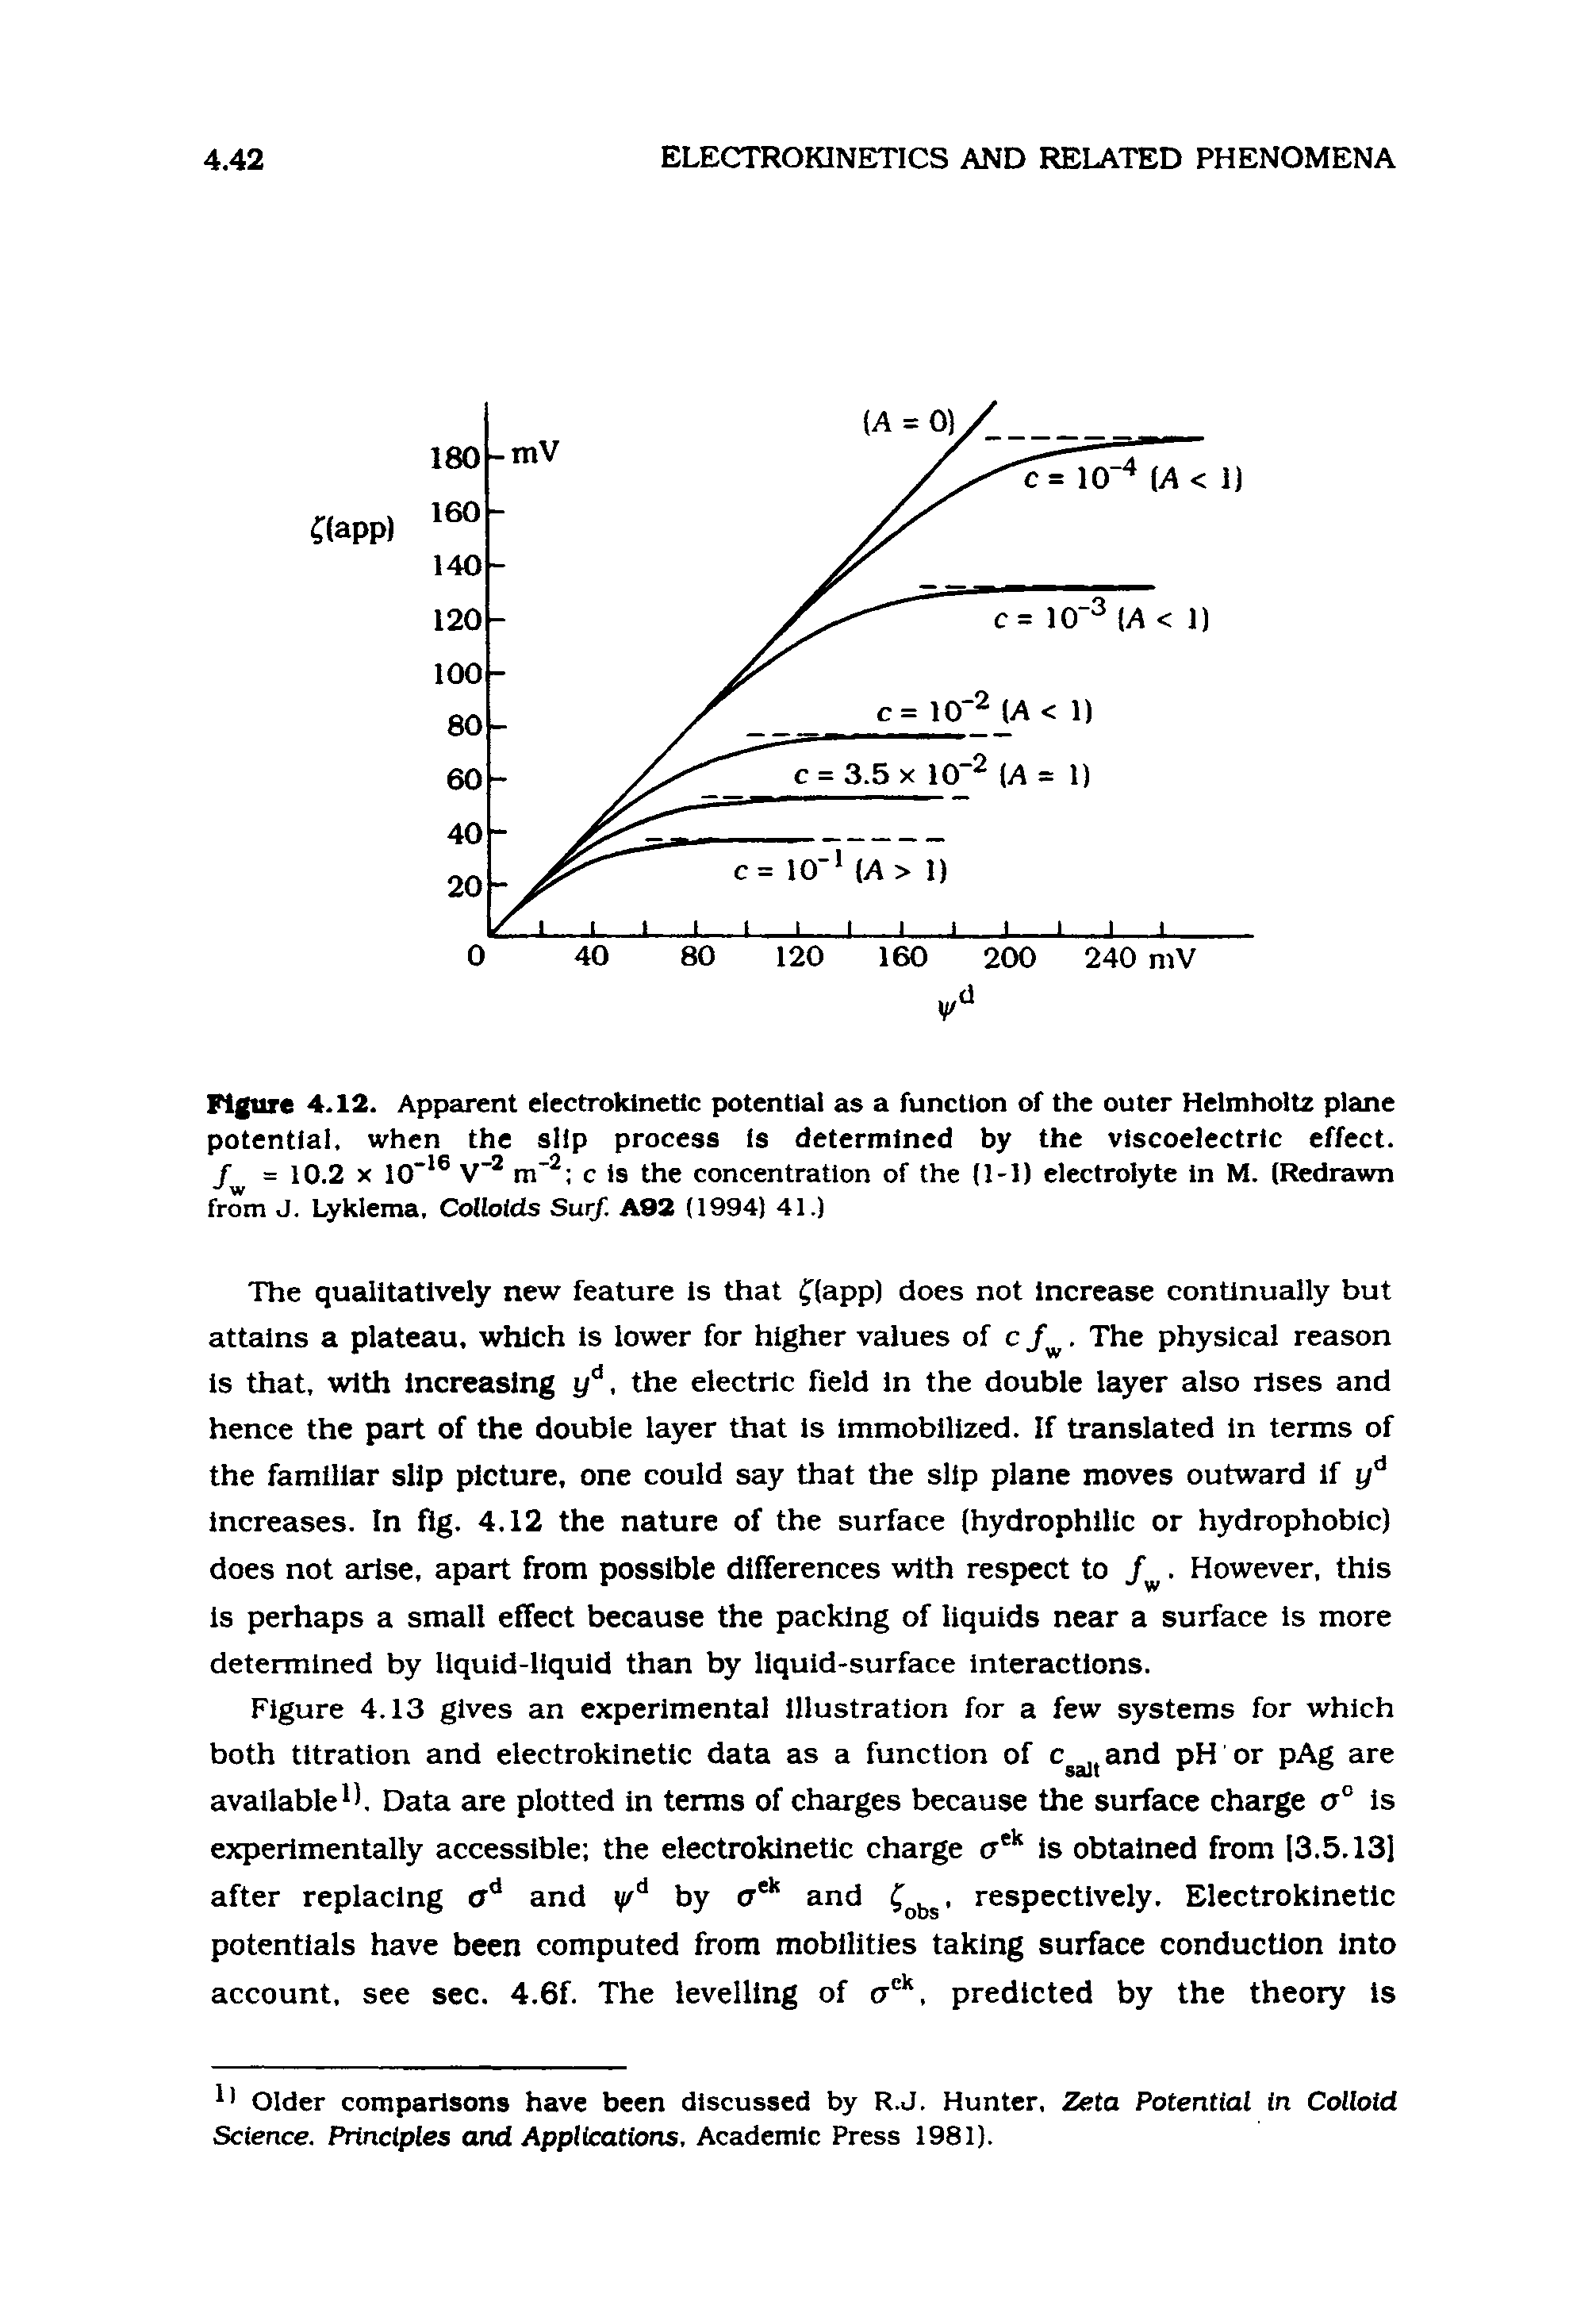 Figure 4.12. Apparent electrokinetic potential as a function of the outer Helmholtz plane potential, when the slip process Is determined by the viscoelectrlc effect. J = 10.2 X 10 V m c Is the concentration of the (1-1) electrolyte In M. (Redrawn from J. Lyklema. Colloids Surf. A92 (1994) 41.)...